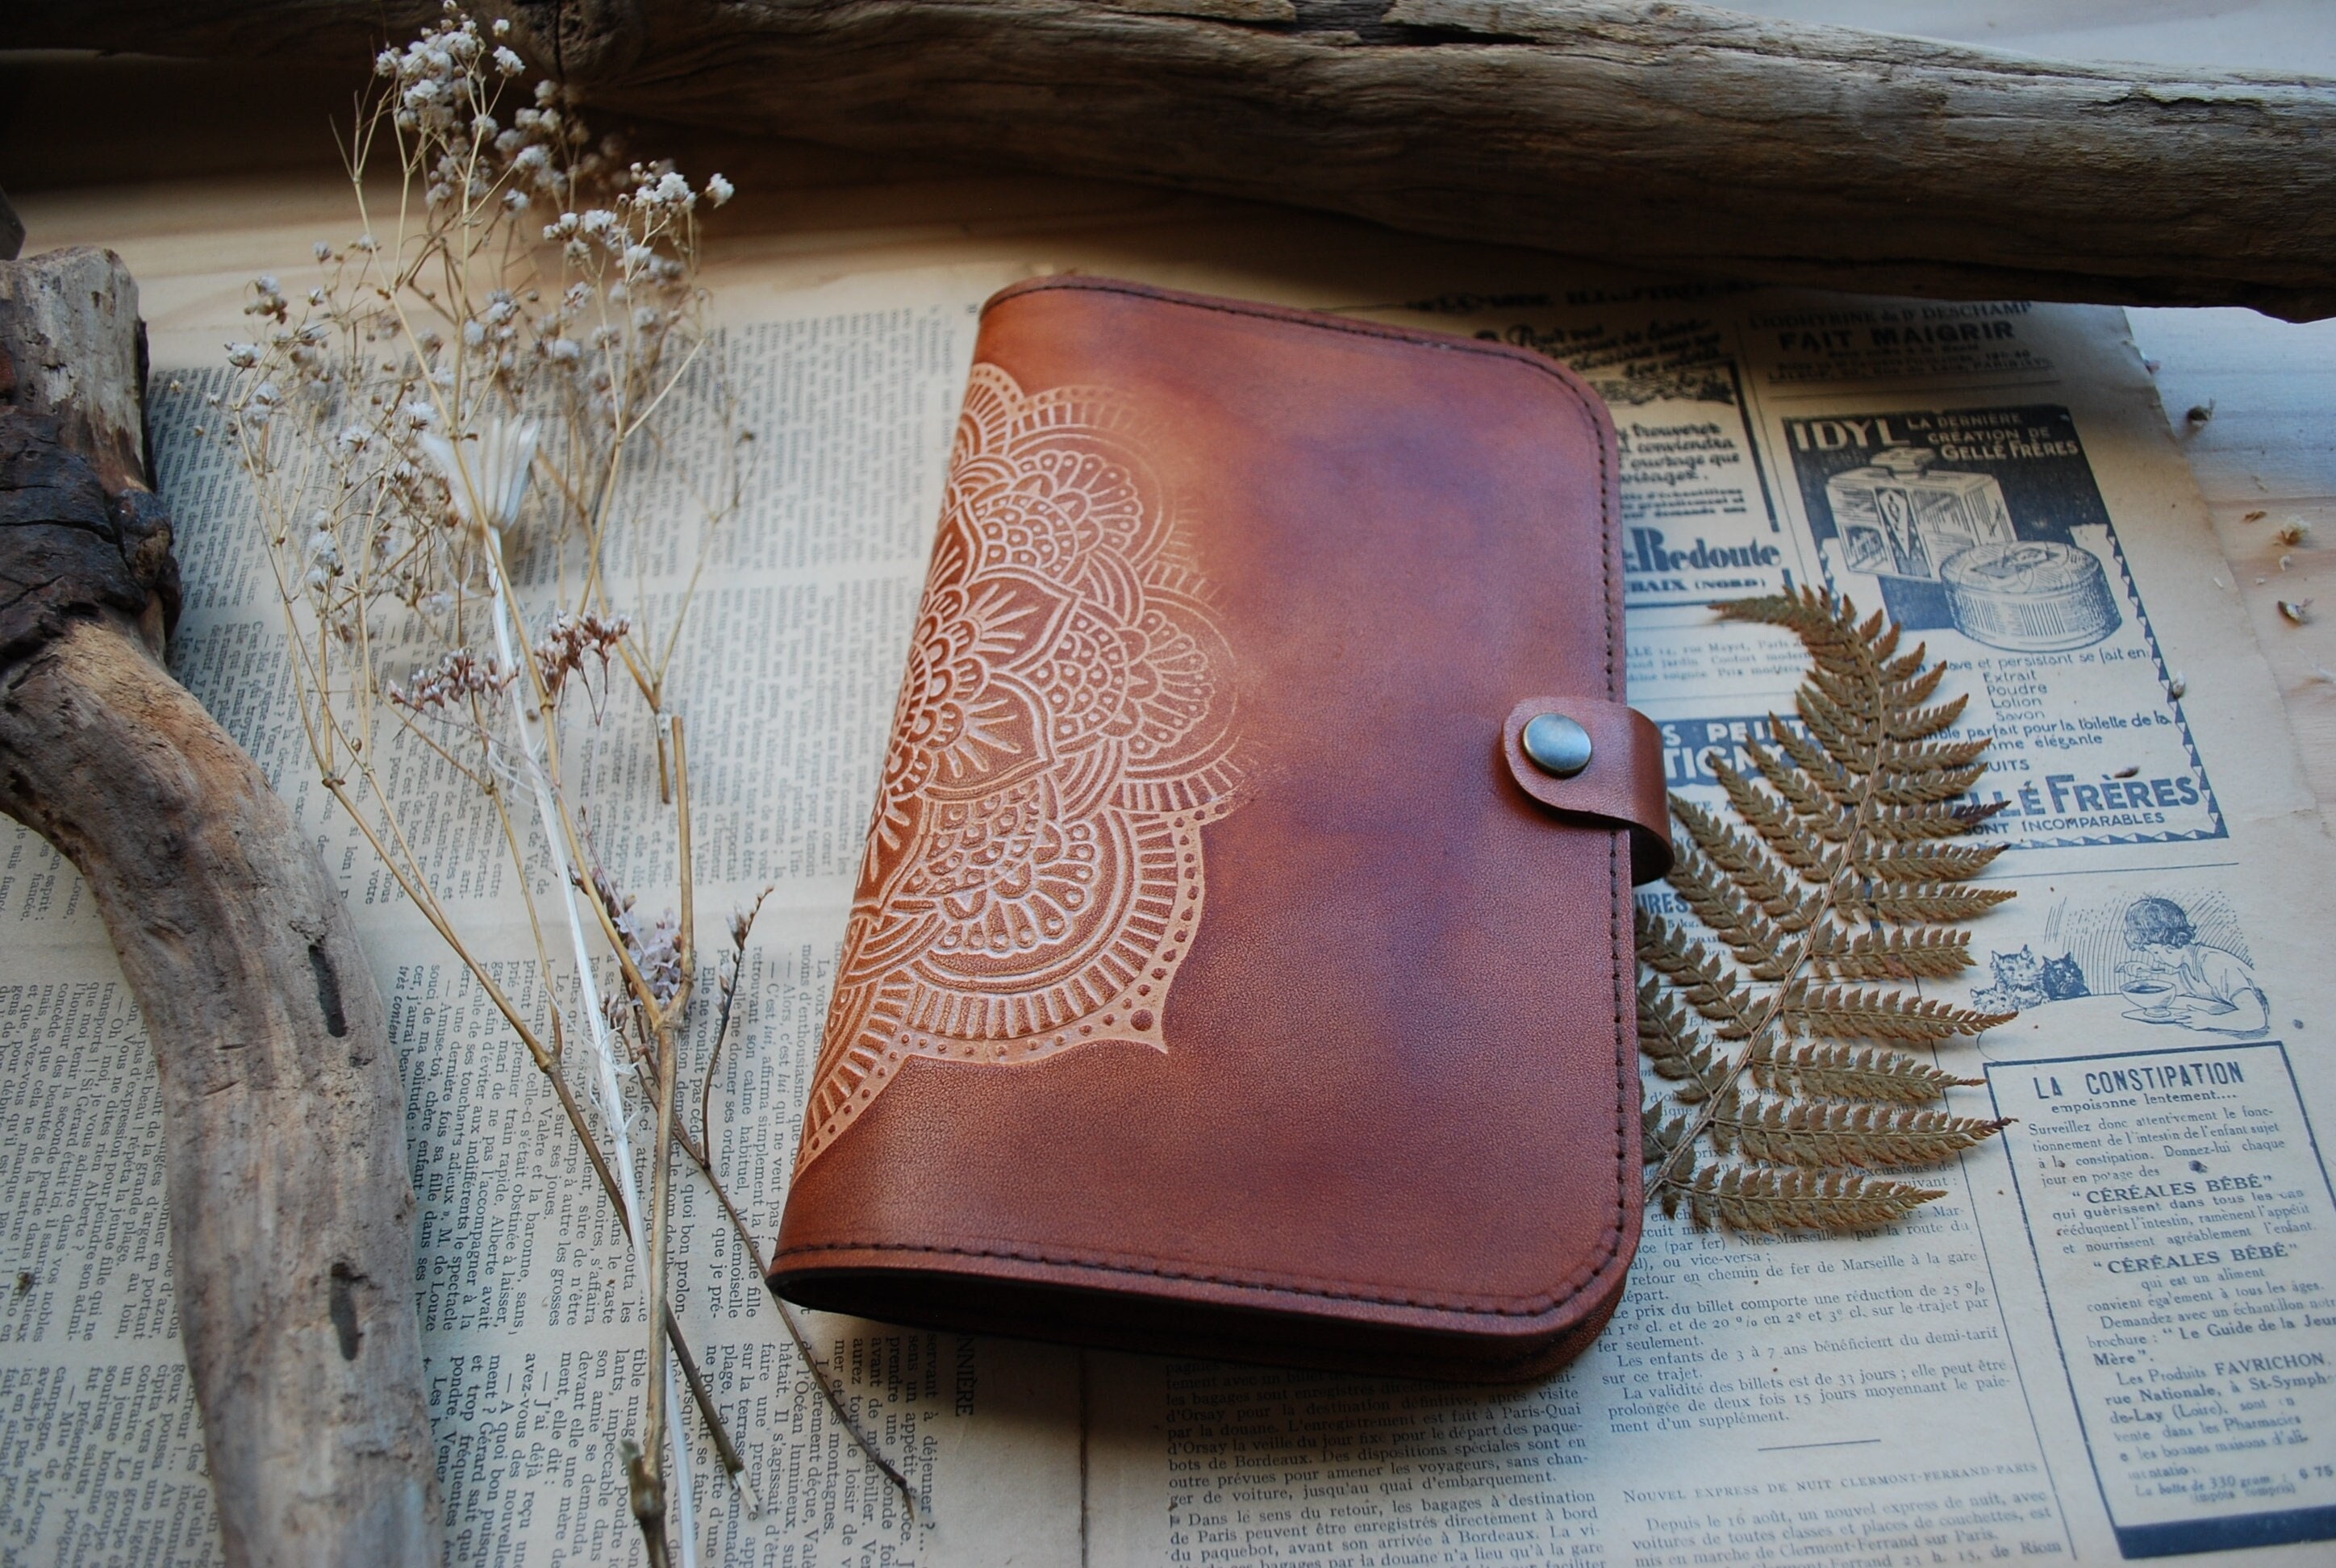 Leather Journal Bound Notebook Personalized A5 Leather Sketchbook